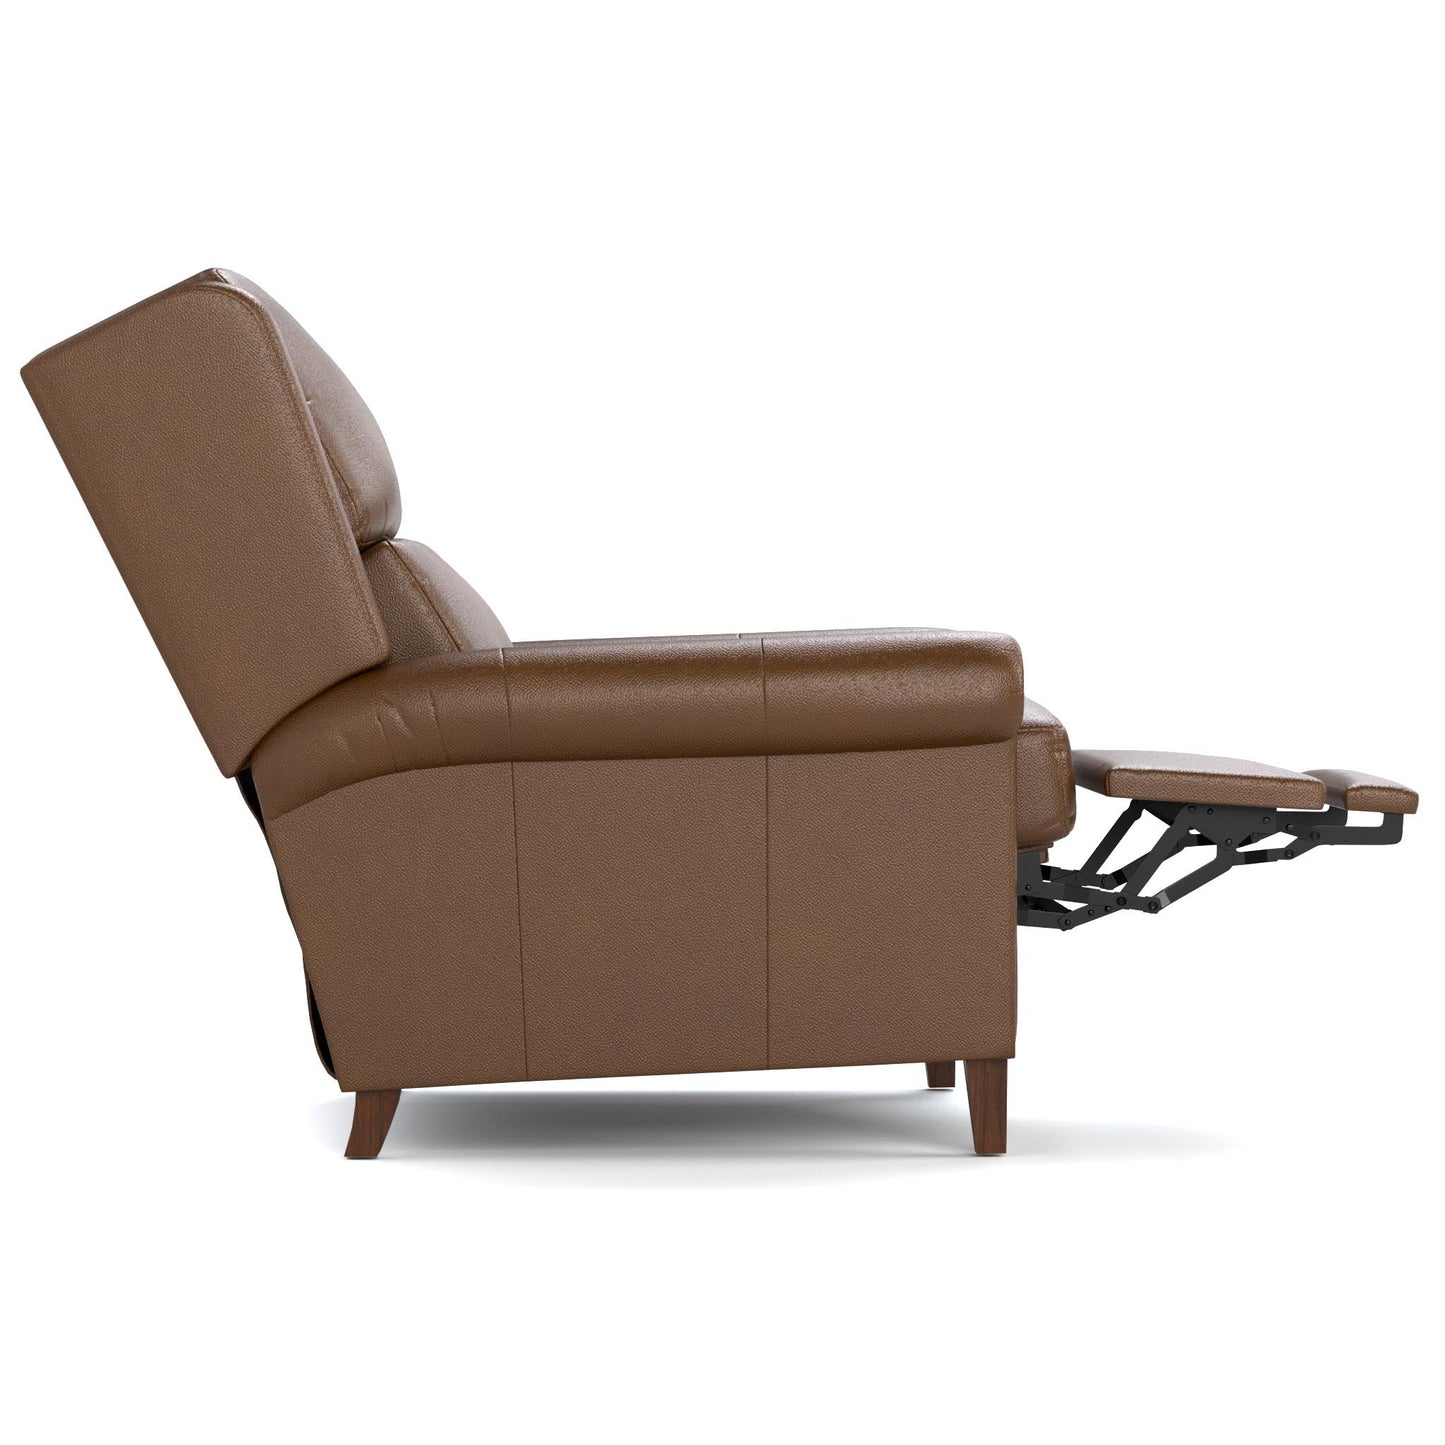 Woodlands Small Roll Arm Manual Recliner Selvano Bark - Side Reclined